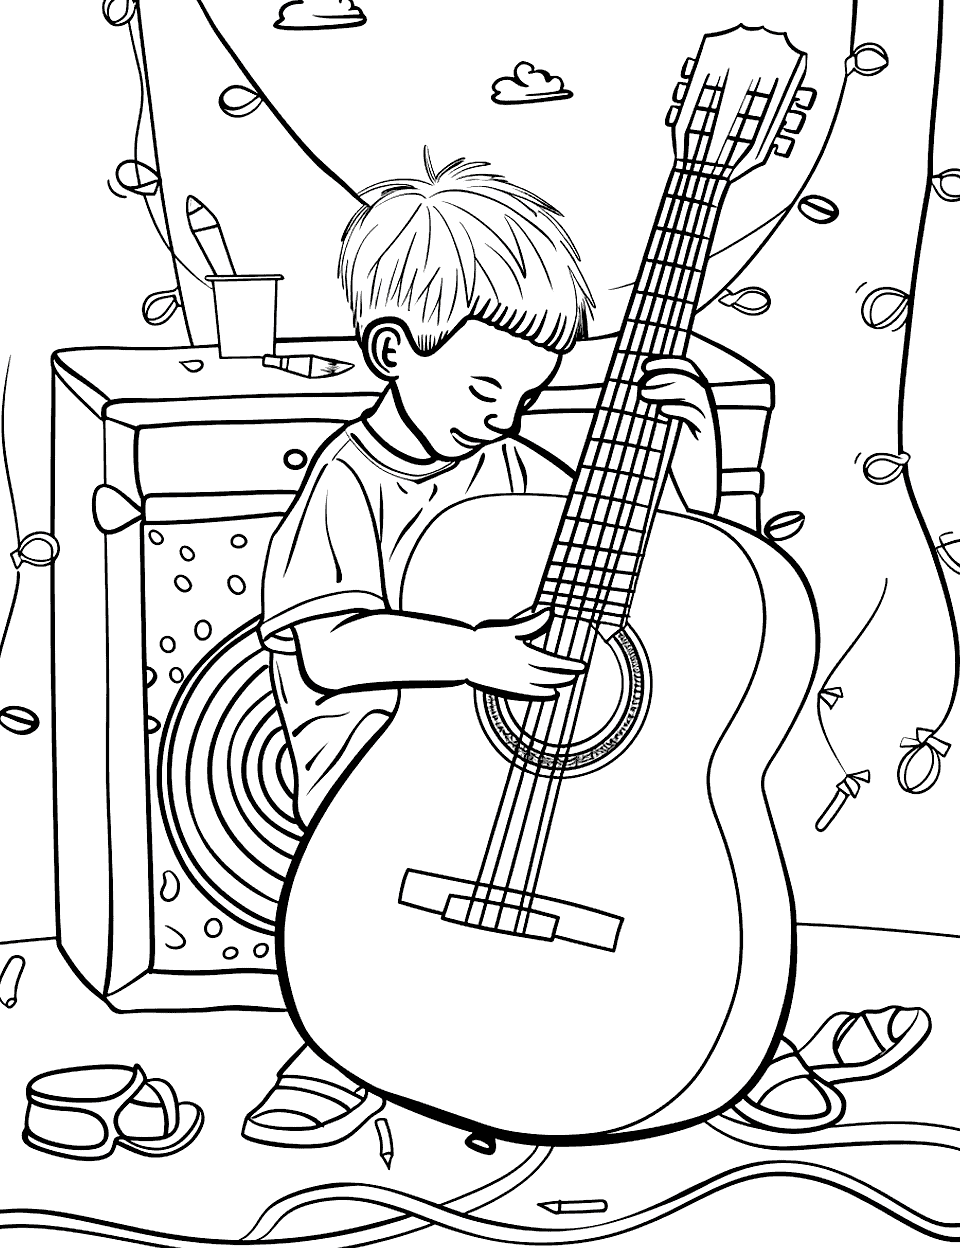 Guitar Crafting Workshop Music Coloring Page - Children playing a huge guitar in a workshop setting.